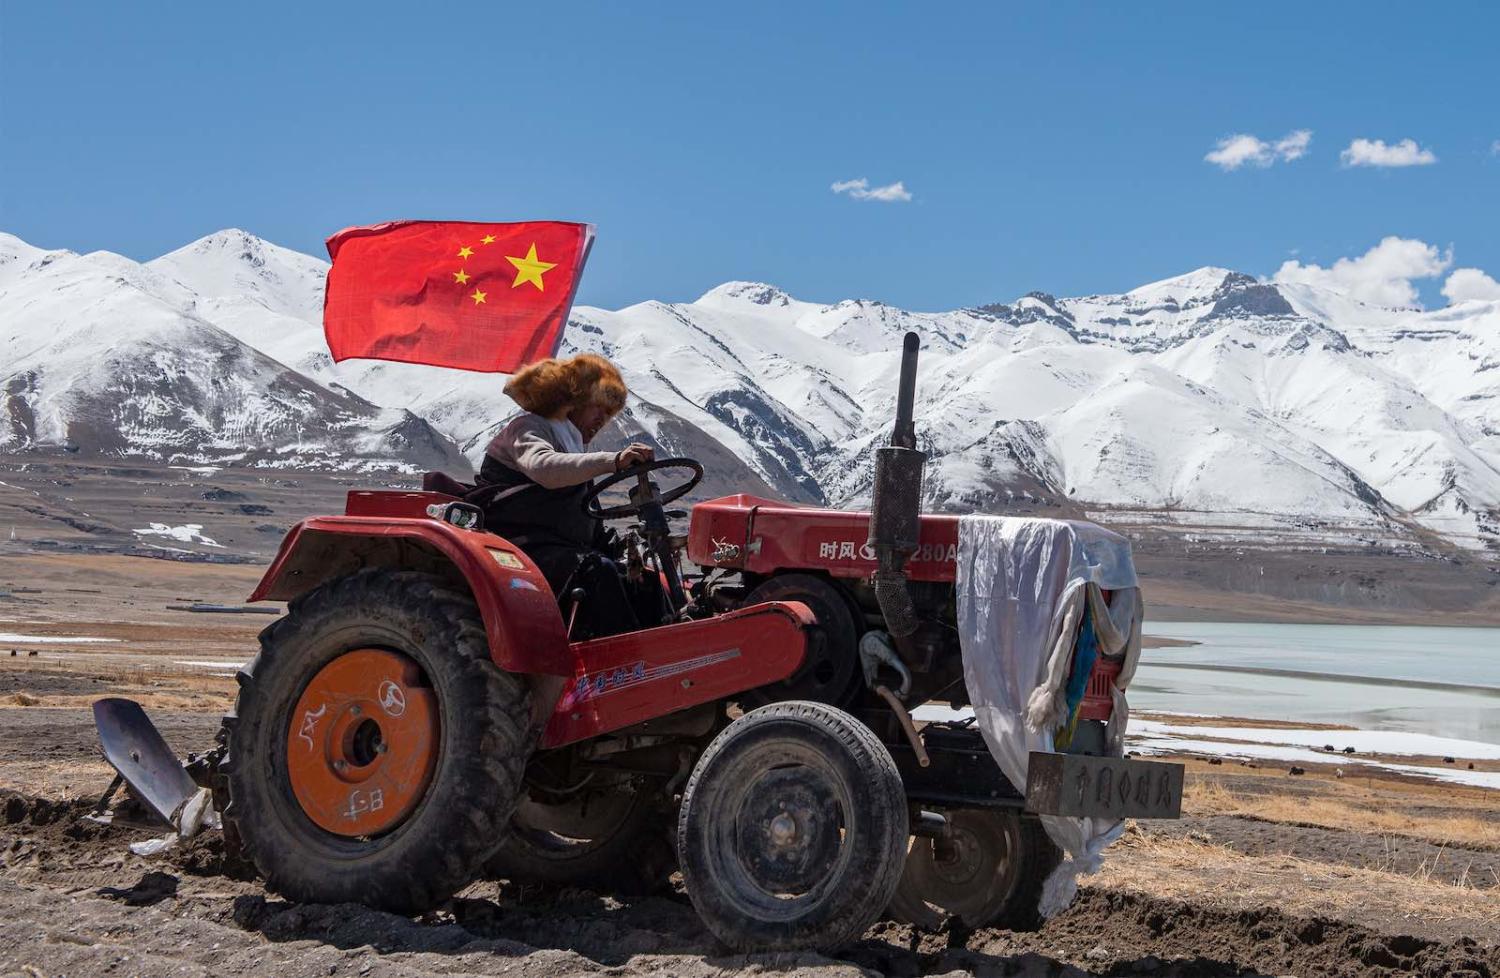 A farmer takes part in a ceremony marking the start of spring ploughing at Beicun Village in Ombu Township of Nyima County, Nagqu City, southwest China’s Tibet Autonomous Region, April 2020 (Hou Jie/Xinhua via Getty Images)